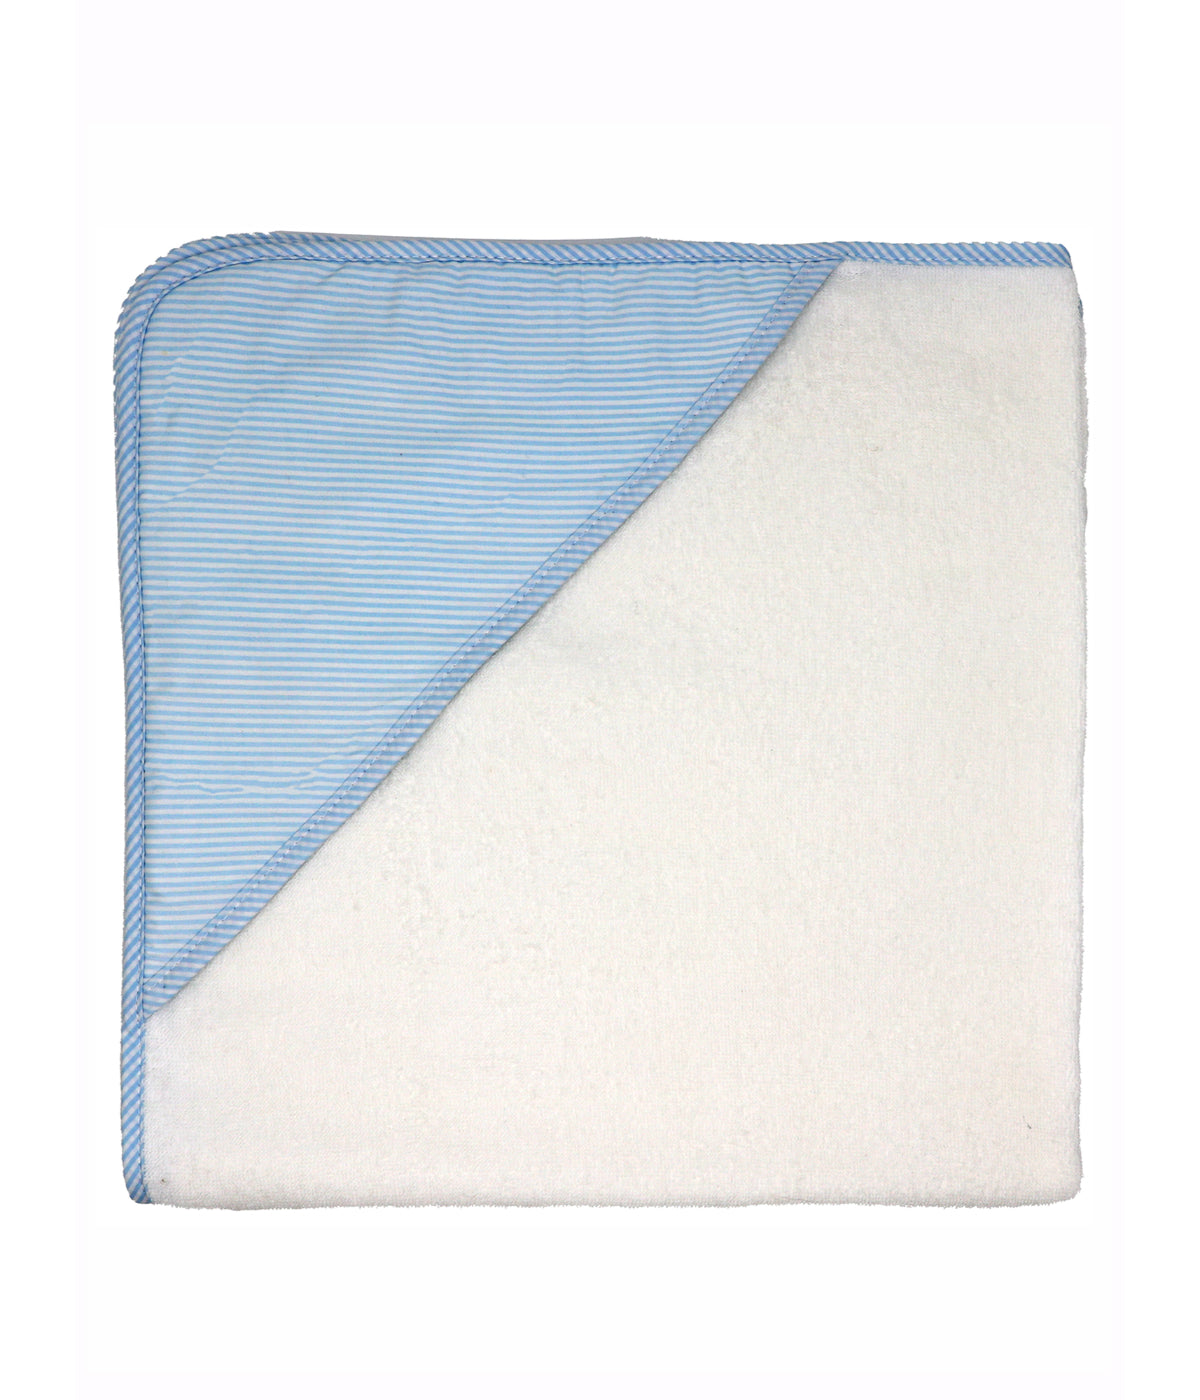 Baby Boys and Girls Bath Towel with Piping Blue